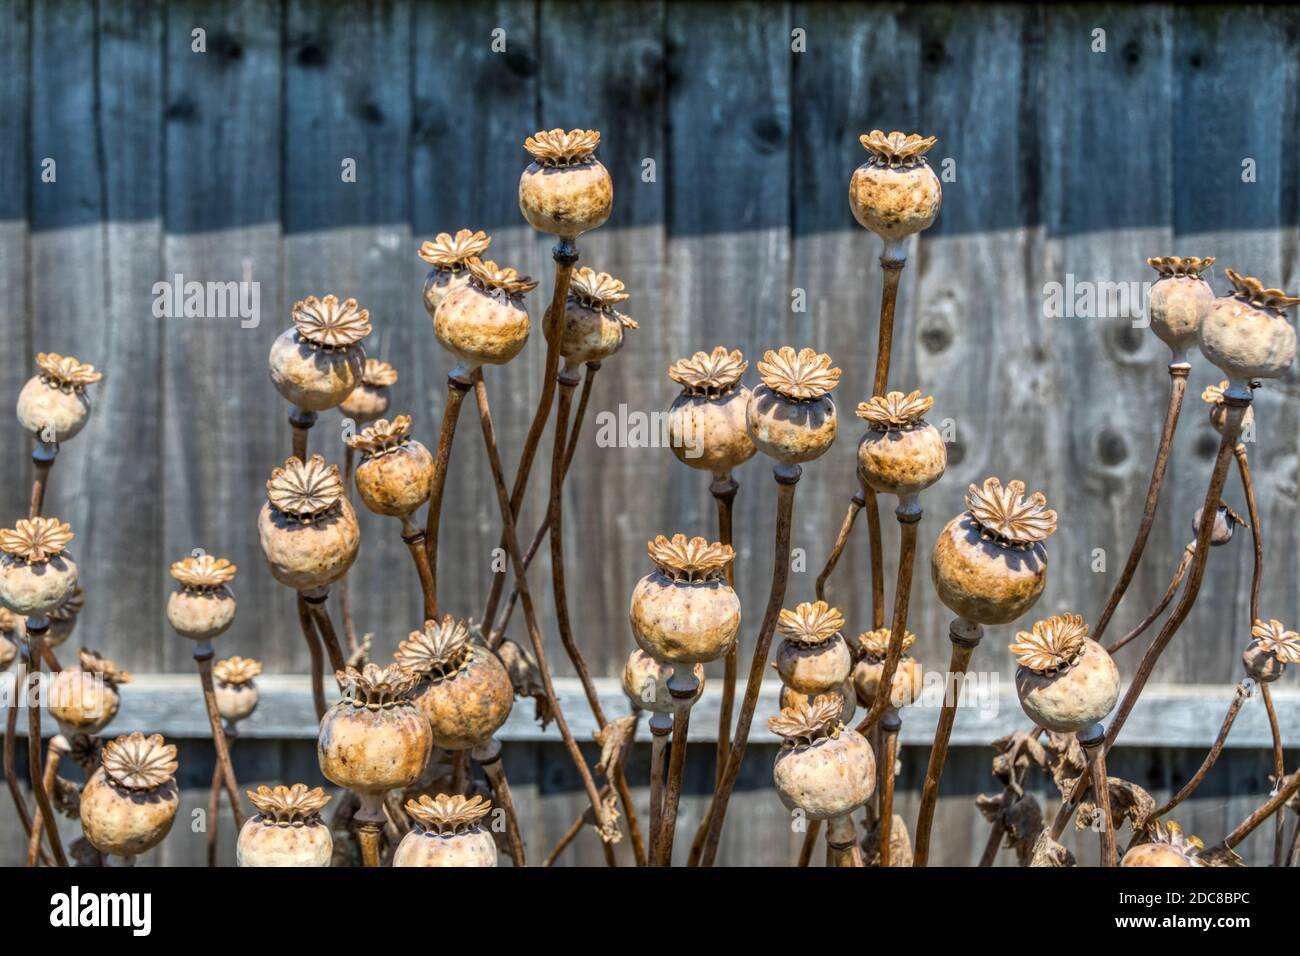 Dried seedheads of opium poppy, Papaver somniferum, against a wooden garden fence. Stock Photo